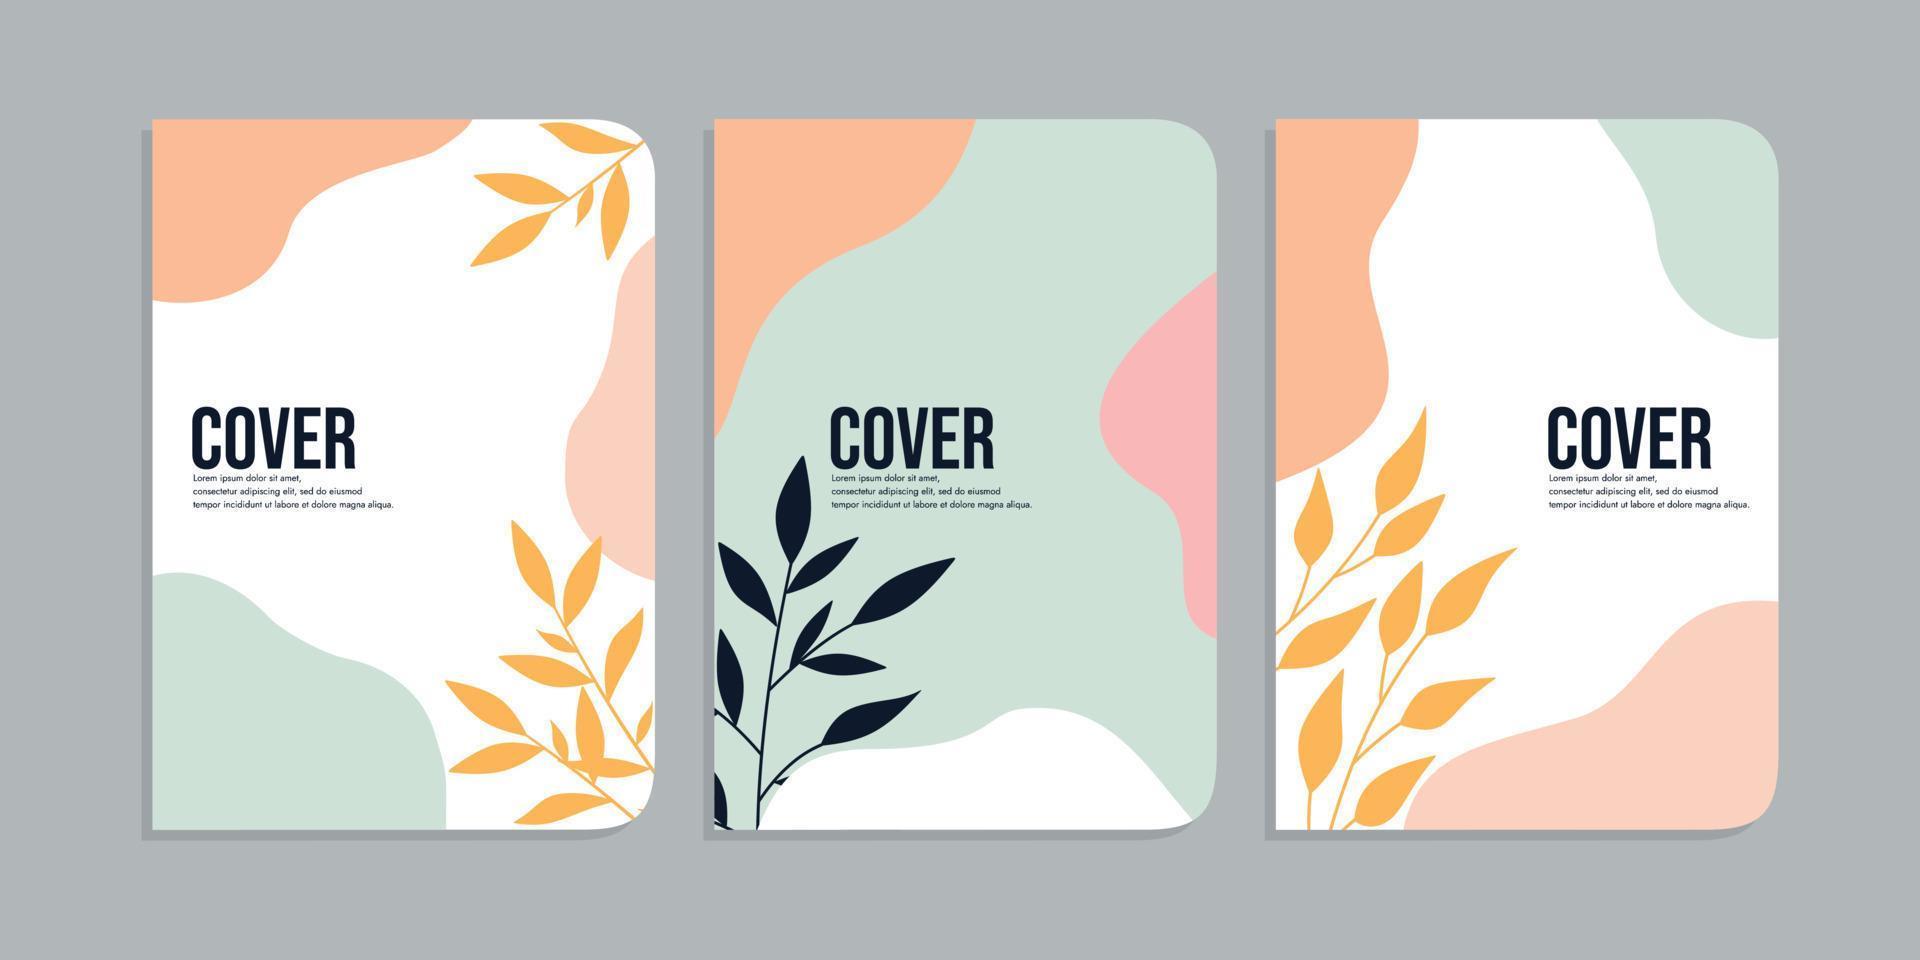 set of school book cover designs with hand drawn floral decorations. abstract retro botanical background. A4 size For notebooks, invitations, planners, brochures, books, catalogs vector